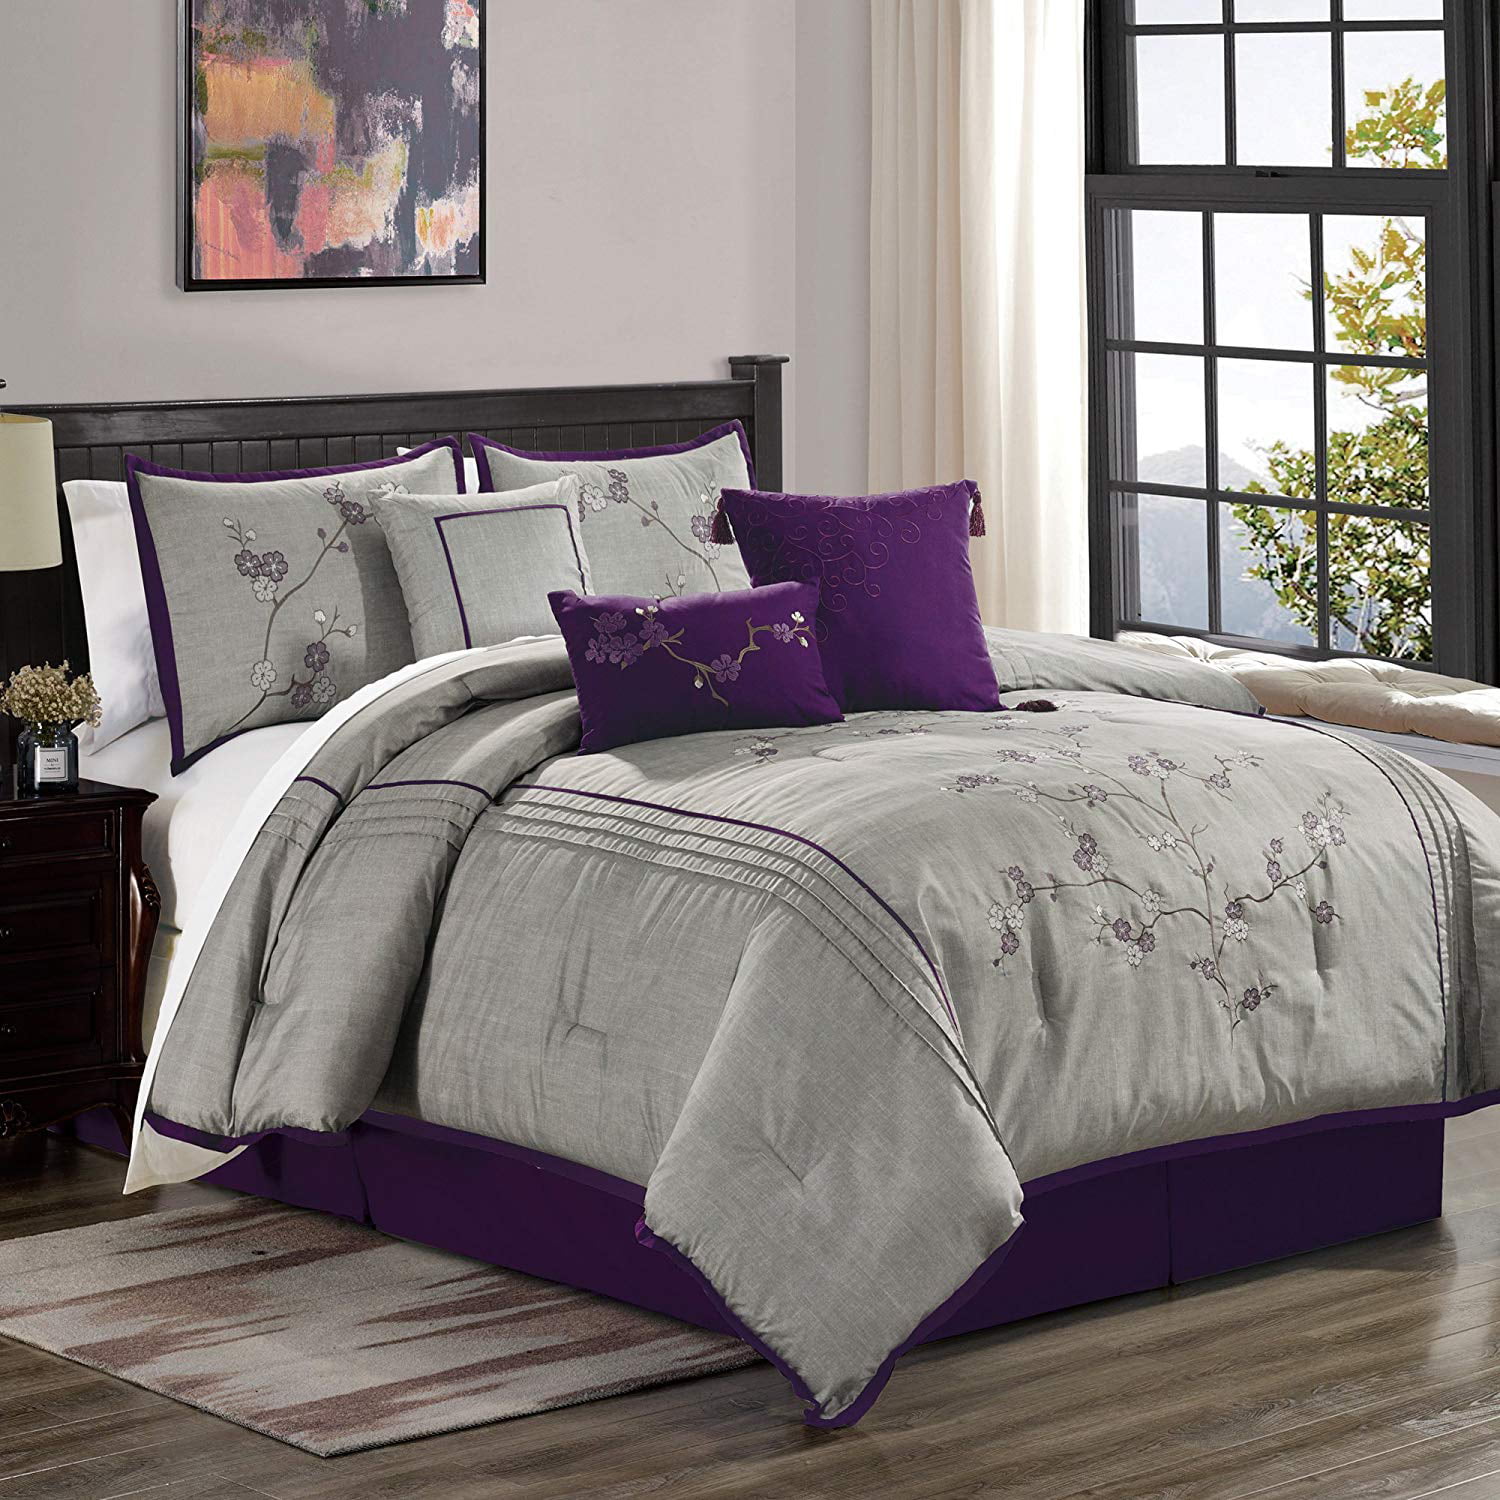 Details about   NEW ~ BEAUTIFUL MODERN CHIC WHITE PURPLE GREY FLOWER ABSTRACT SOFT COMFORTER SET 